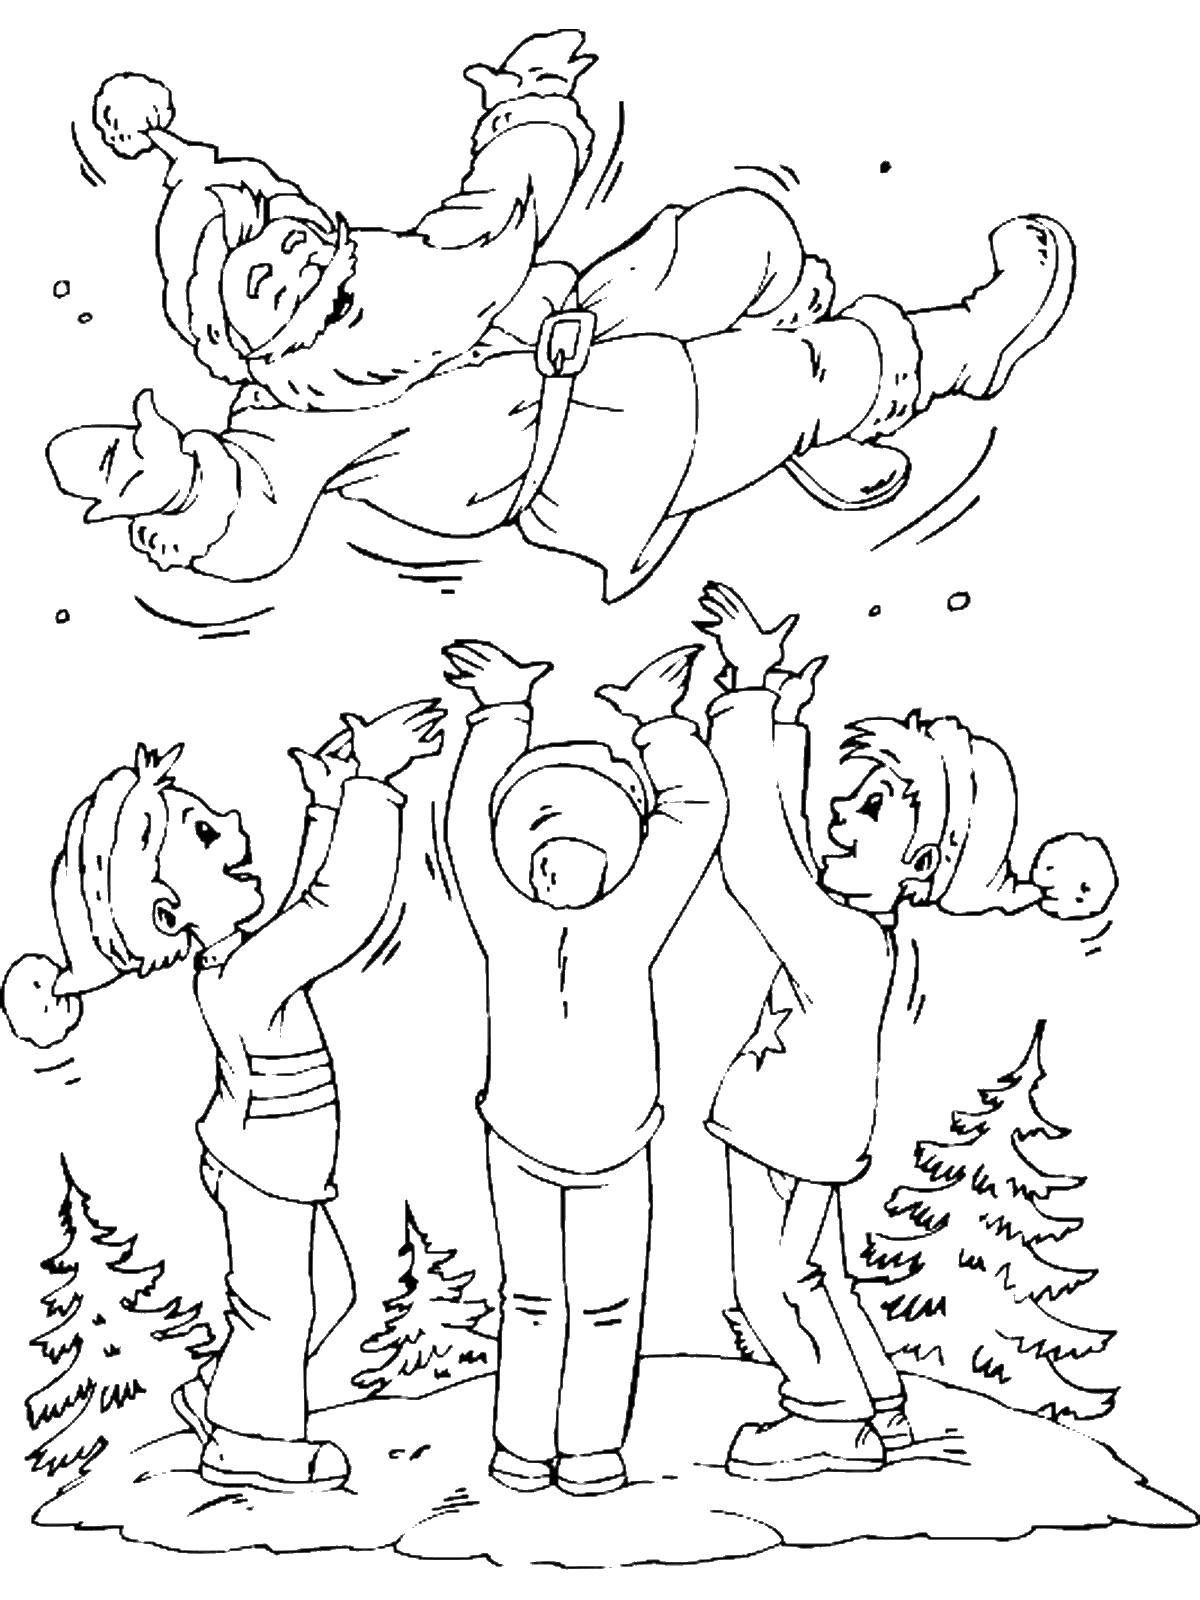 Coloring Kids and Santa Claus. Category Coloring pages for kids. Tags:  children, Santa Claus.